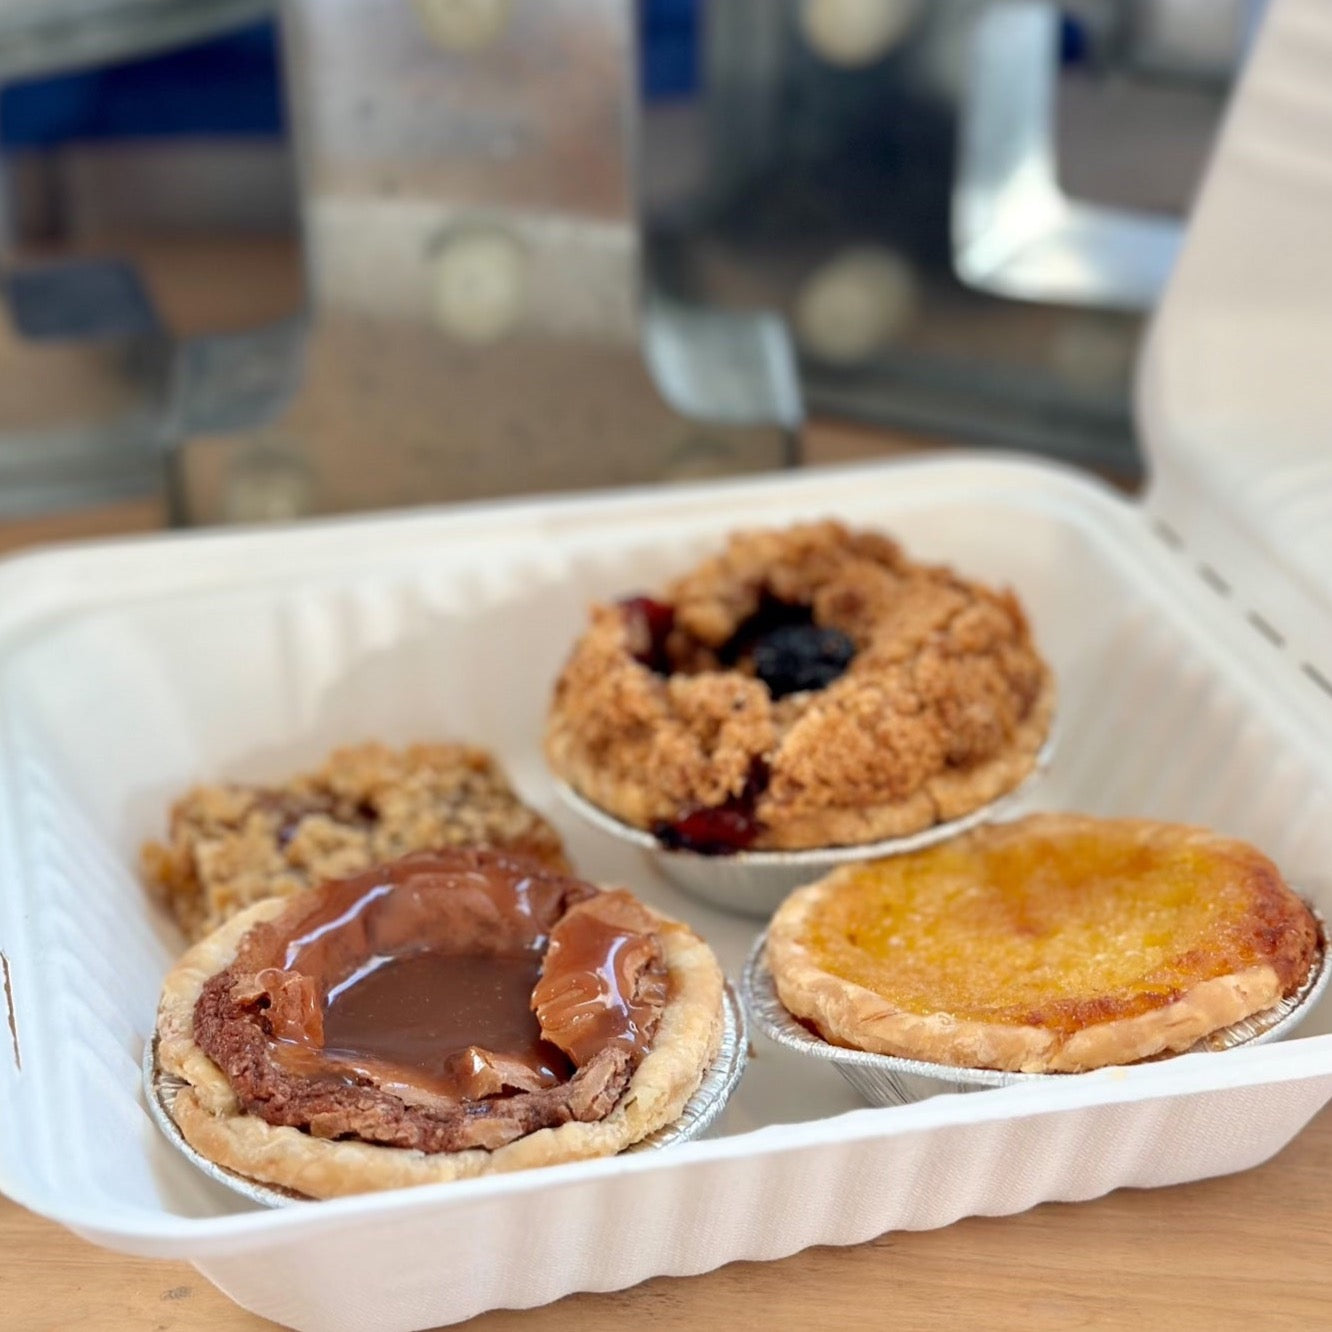 A SPECIAL PI DAY BOX - AVAILABLE for PICK UP 3/14 ONLY